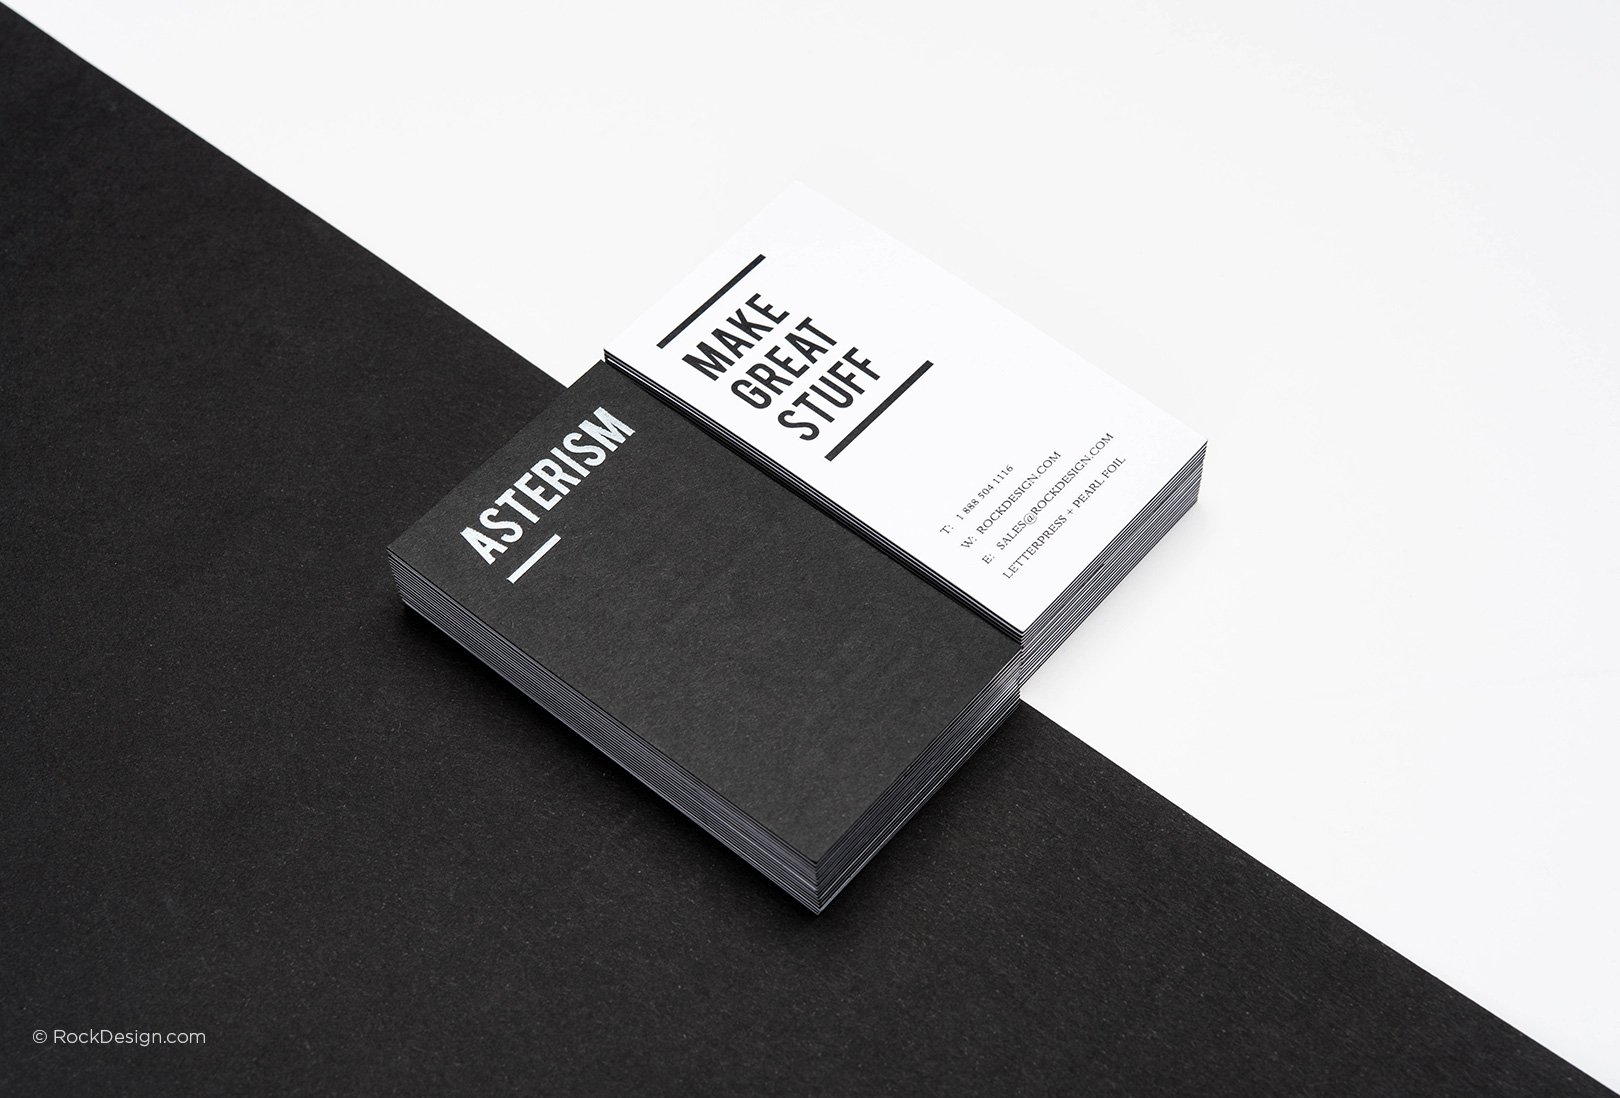 FREE Black and white business card templates  RockDesign.com Pertaining To Black And White Business Cards Templates Free